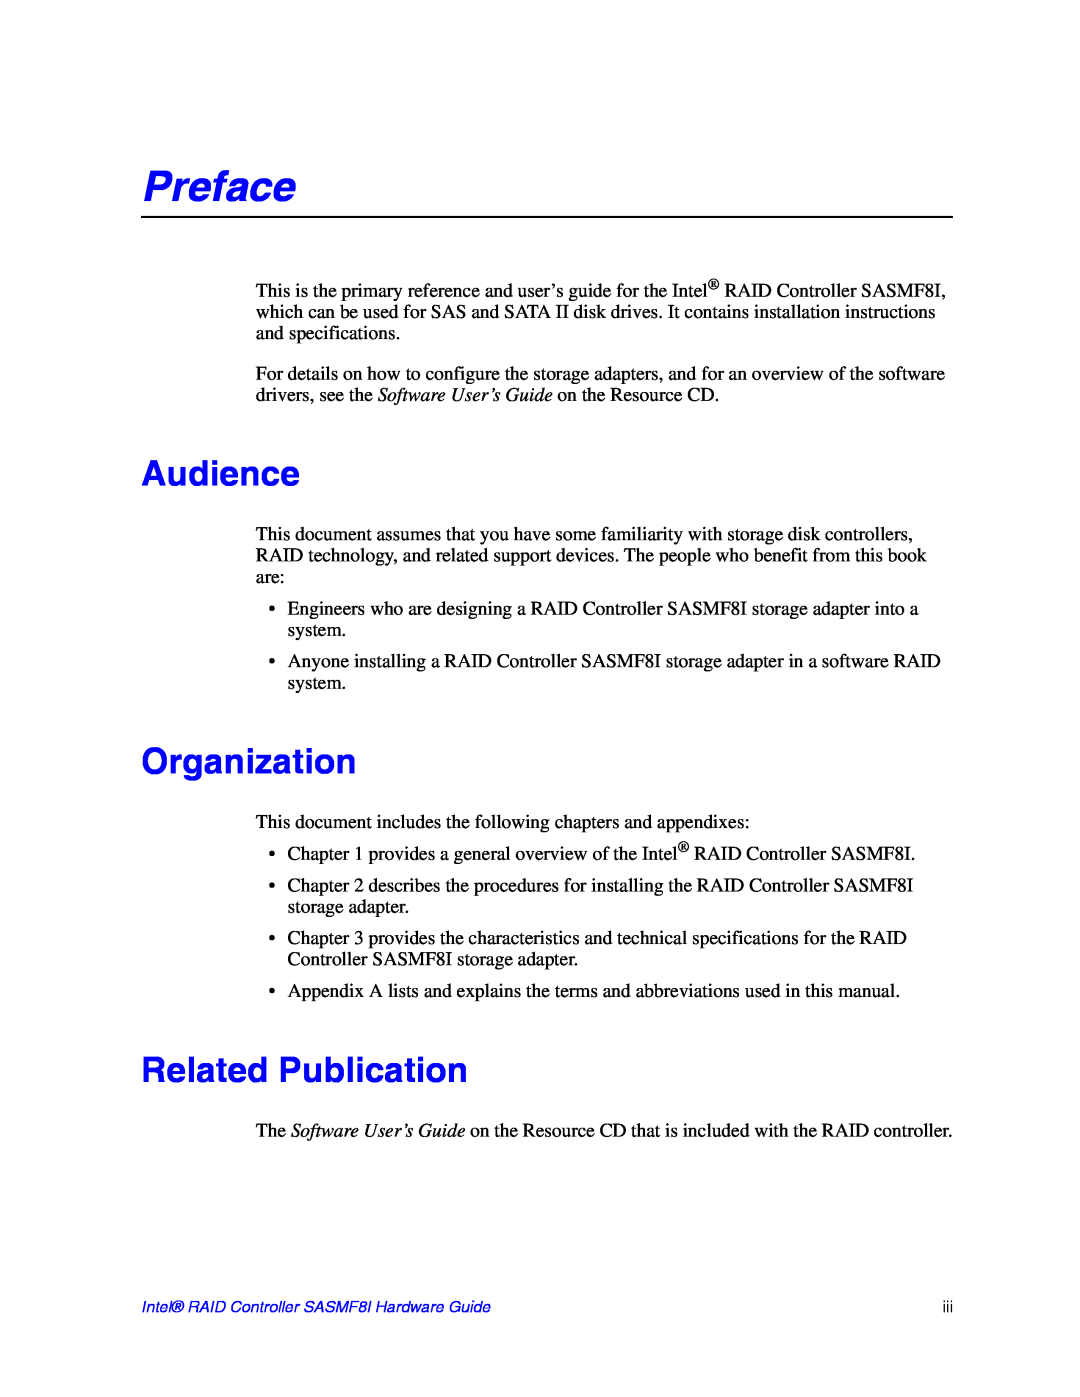 Intel SASMF8I manual Audience, Organization, Related Publication, Preface 